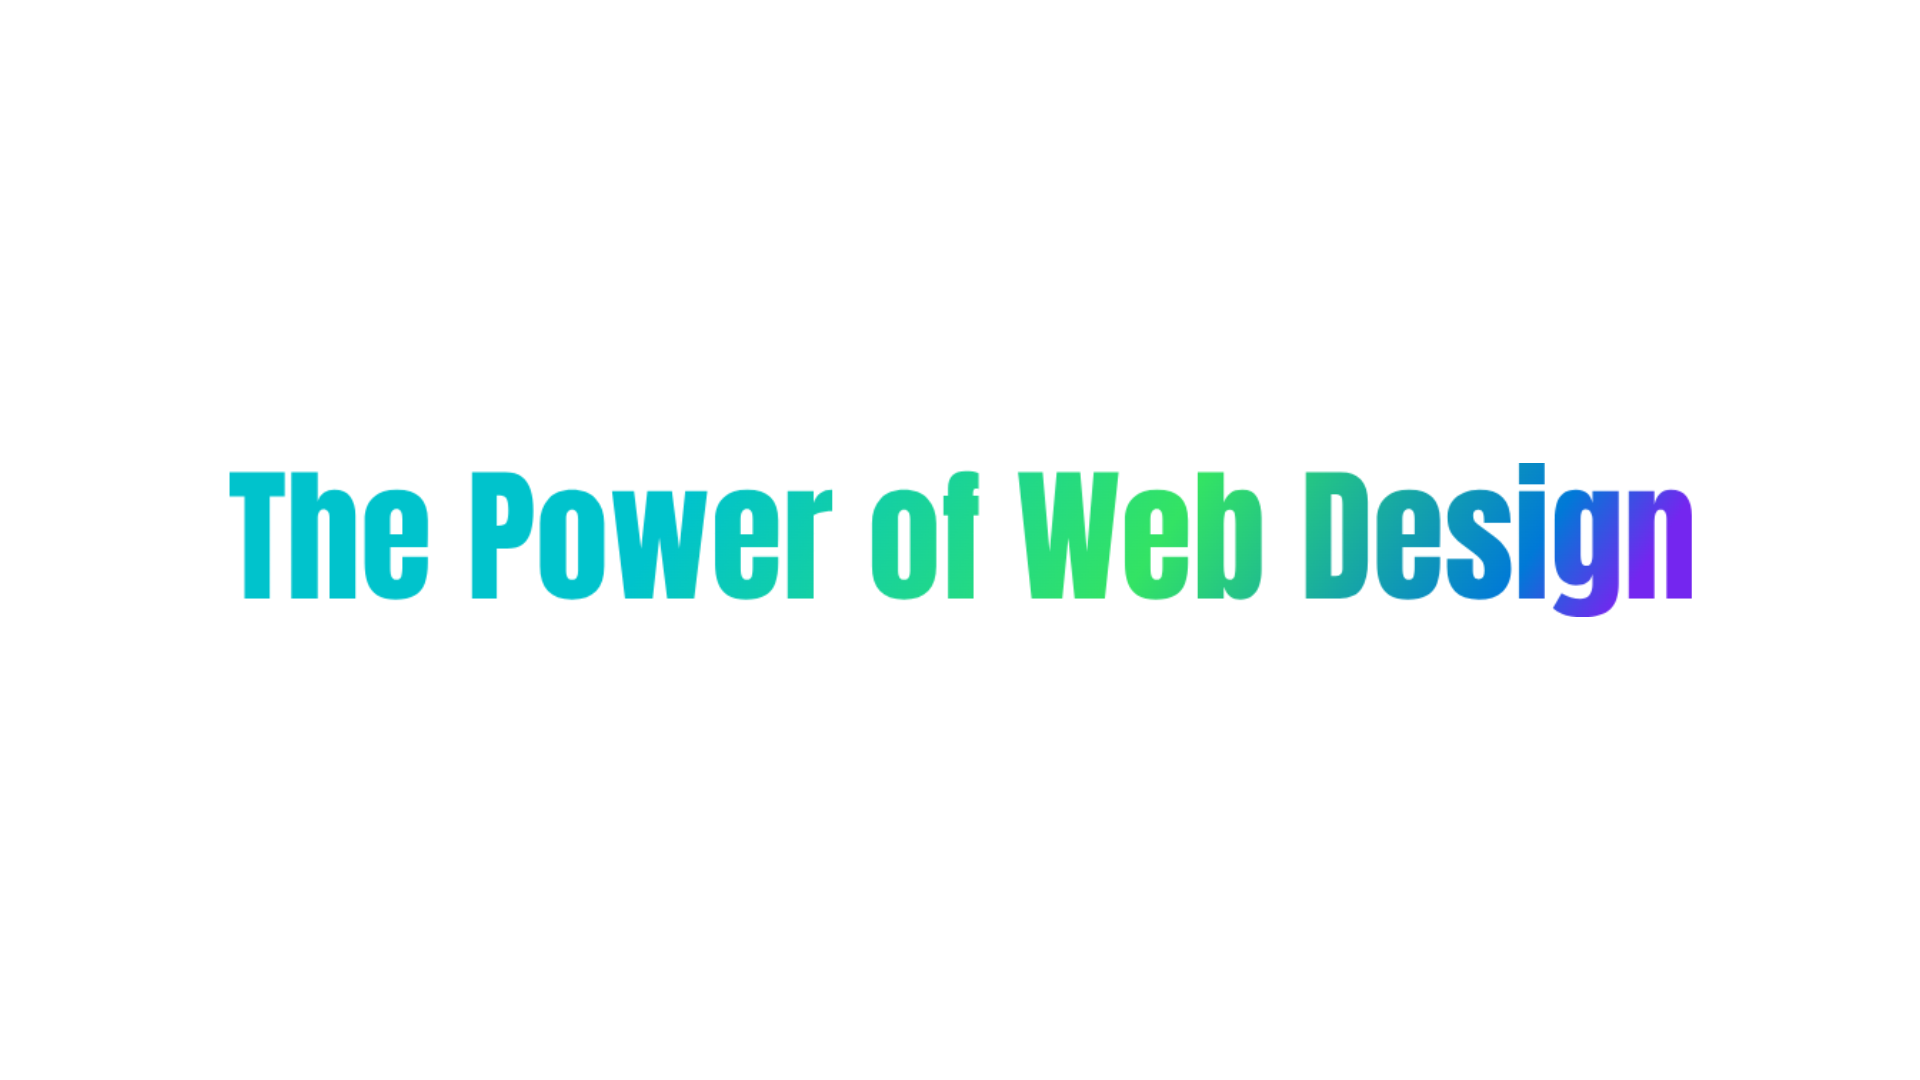 The Power of Web Design